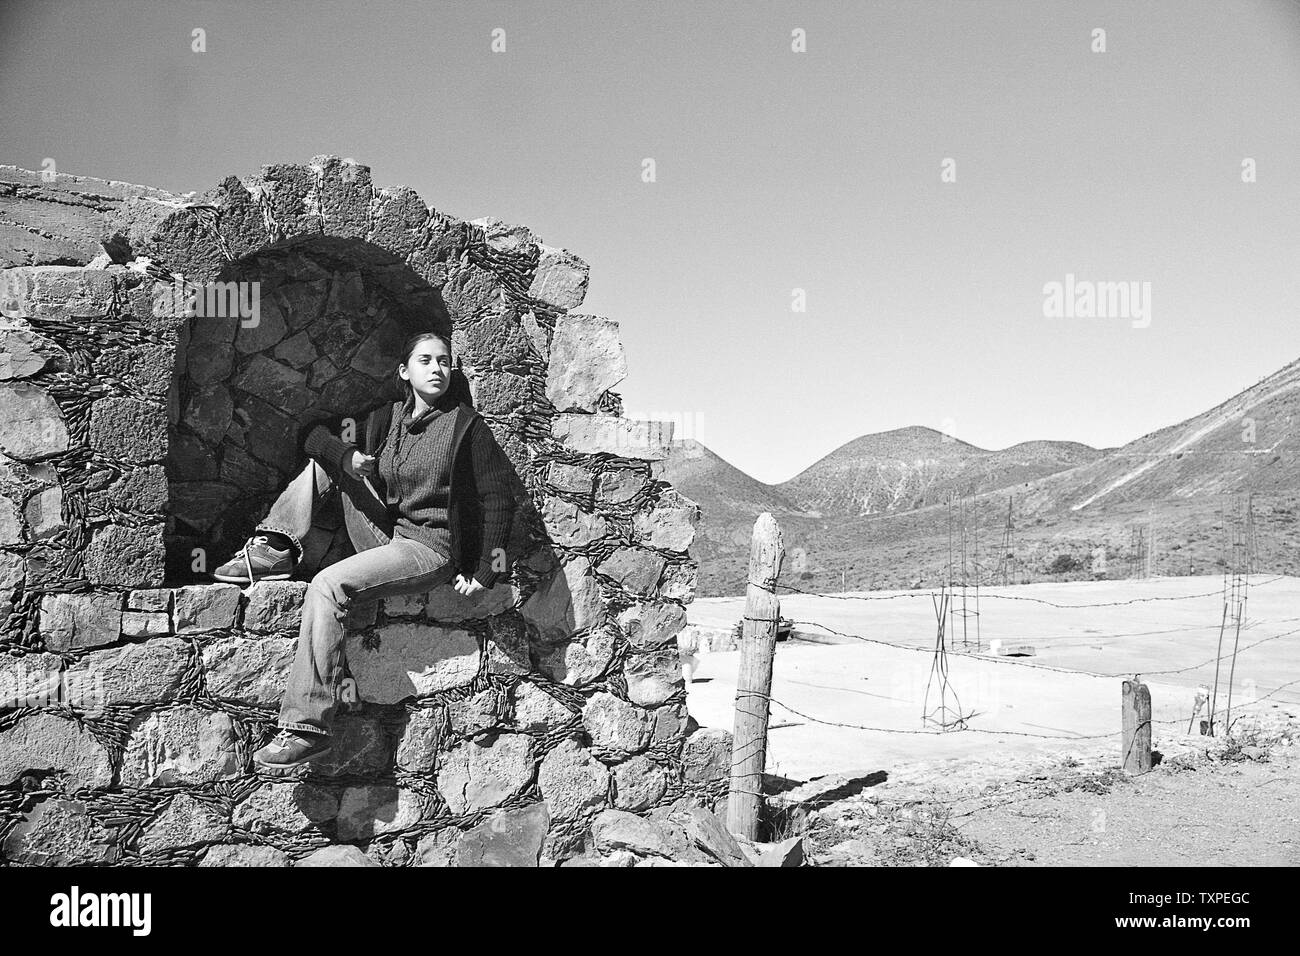 REAL DE CATORCE, SLP/MEXICO - NOV 18, 2002: Outdoor portrait of mexican young women touring the town. Stock Photo